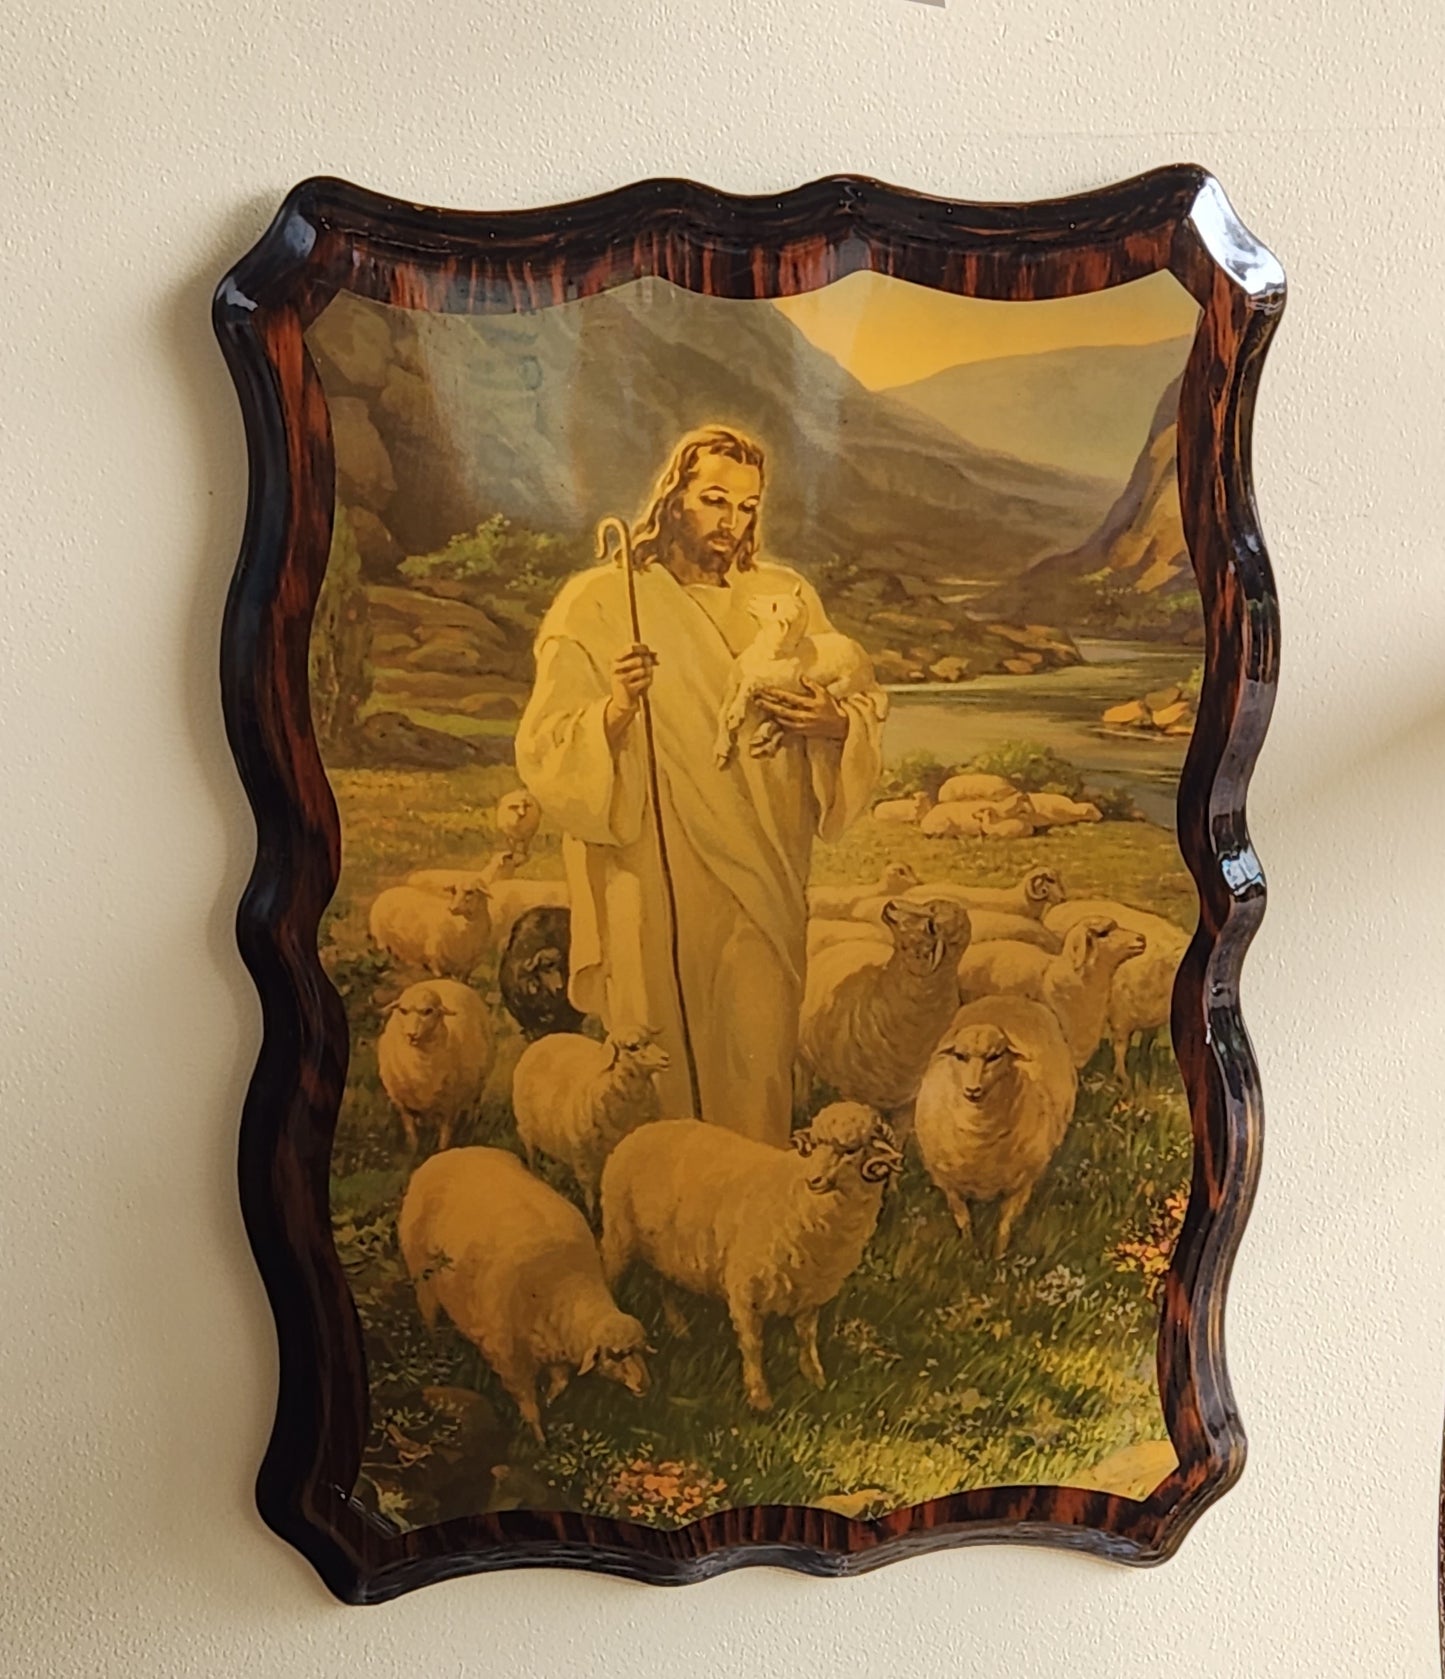 Vintage Religious Lacqured Wood Wall Art Plaque